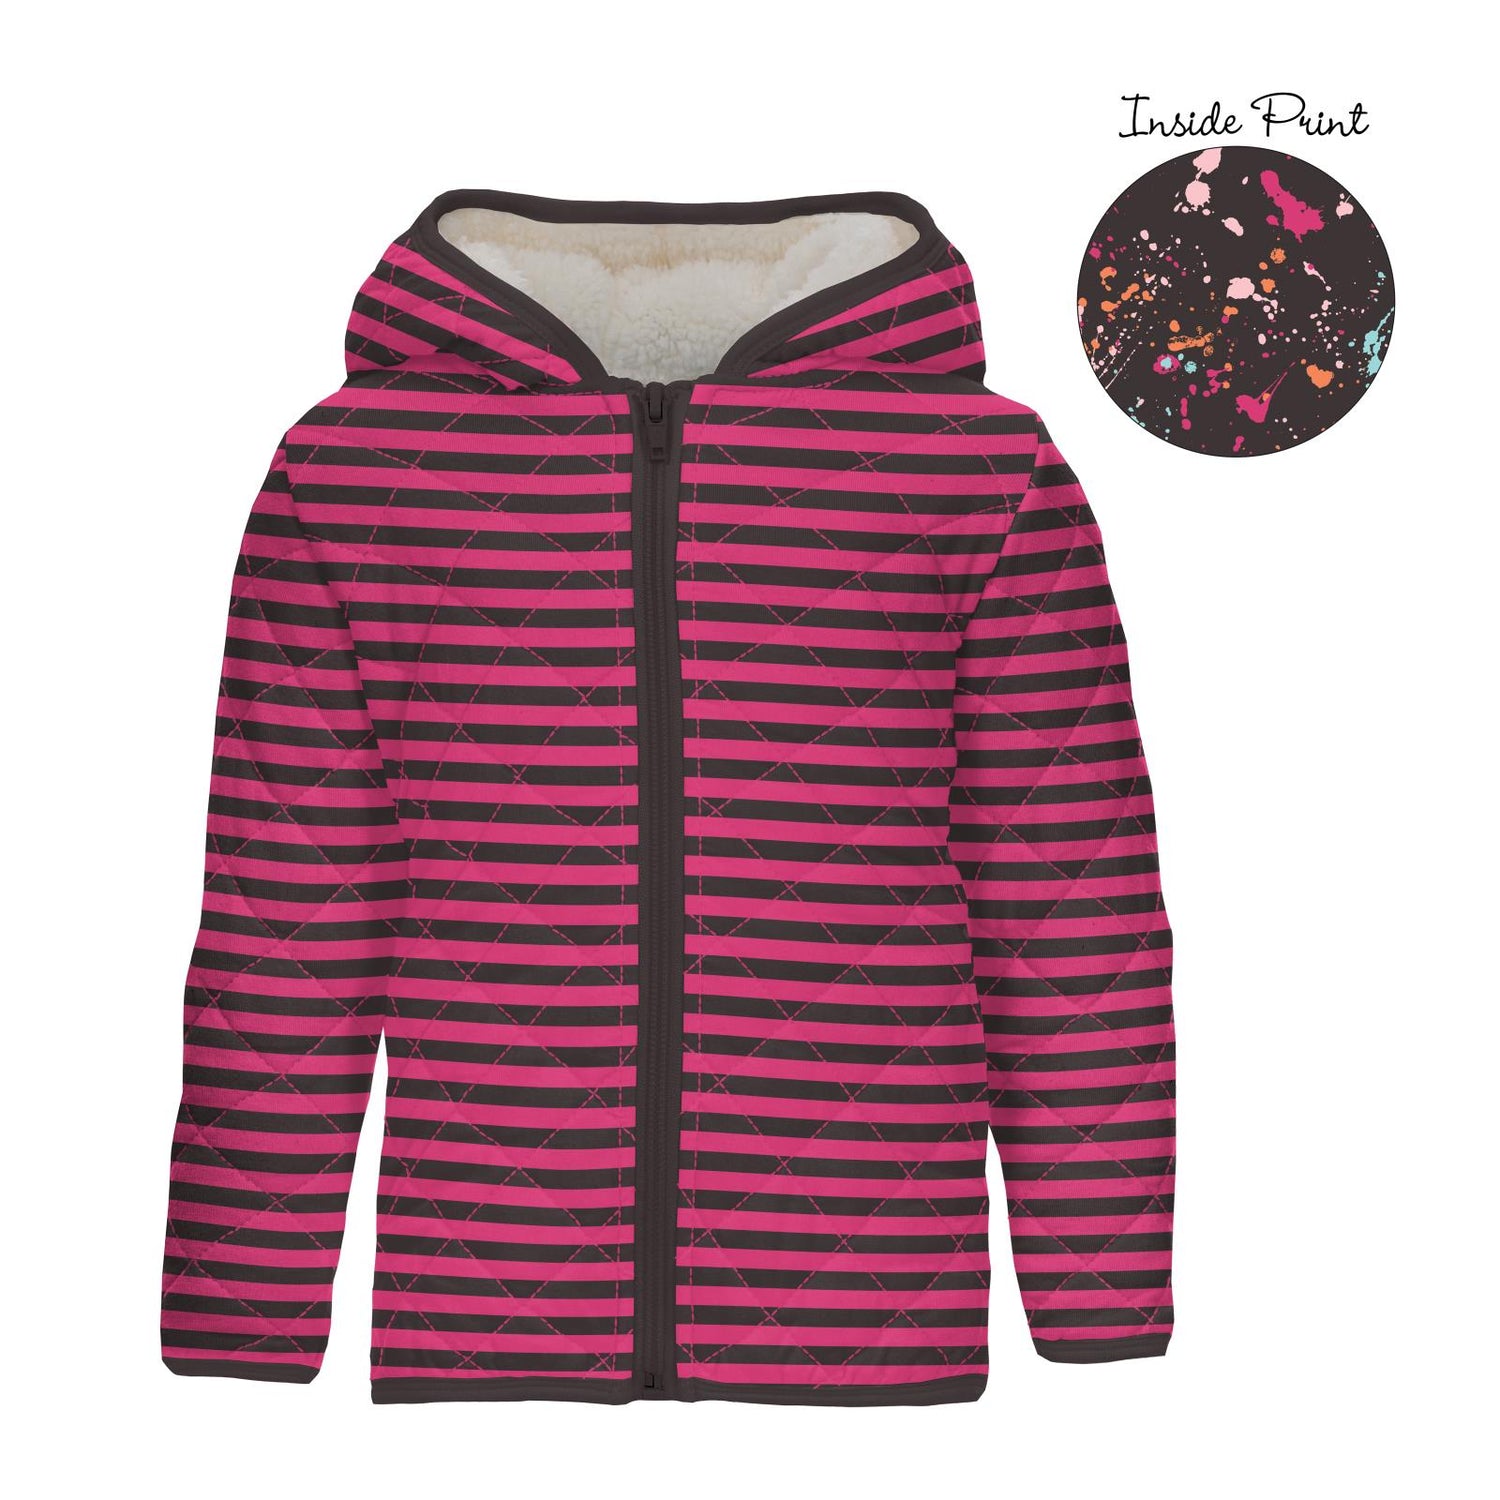 Print Quilted Jacket with Sherpa-Lined Hood in Awesome Stripe/Calypso Splatter Paint